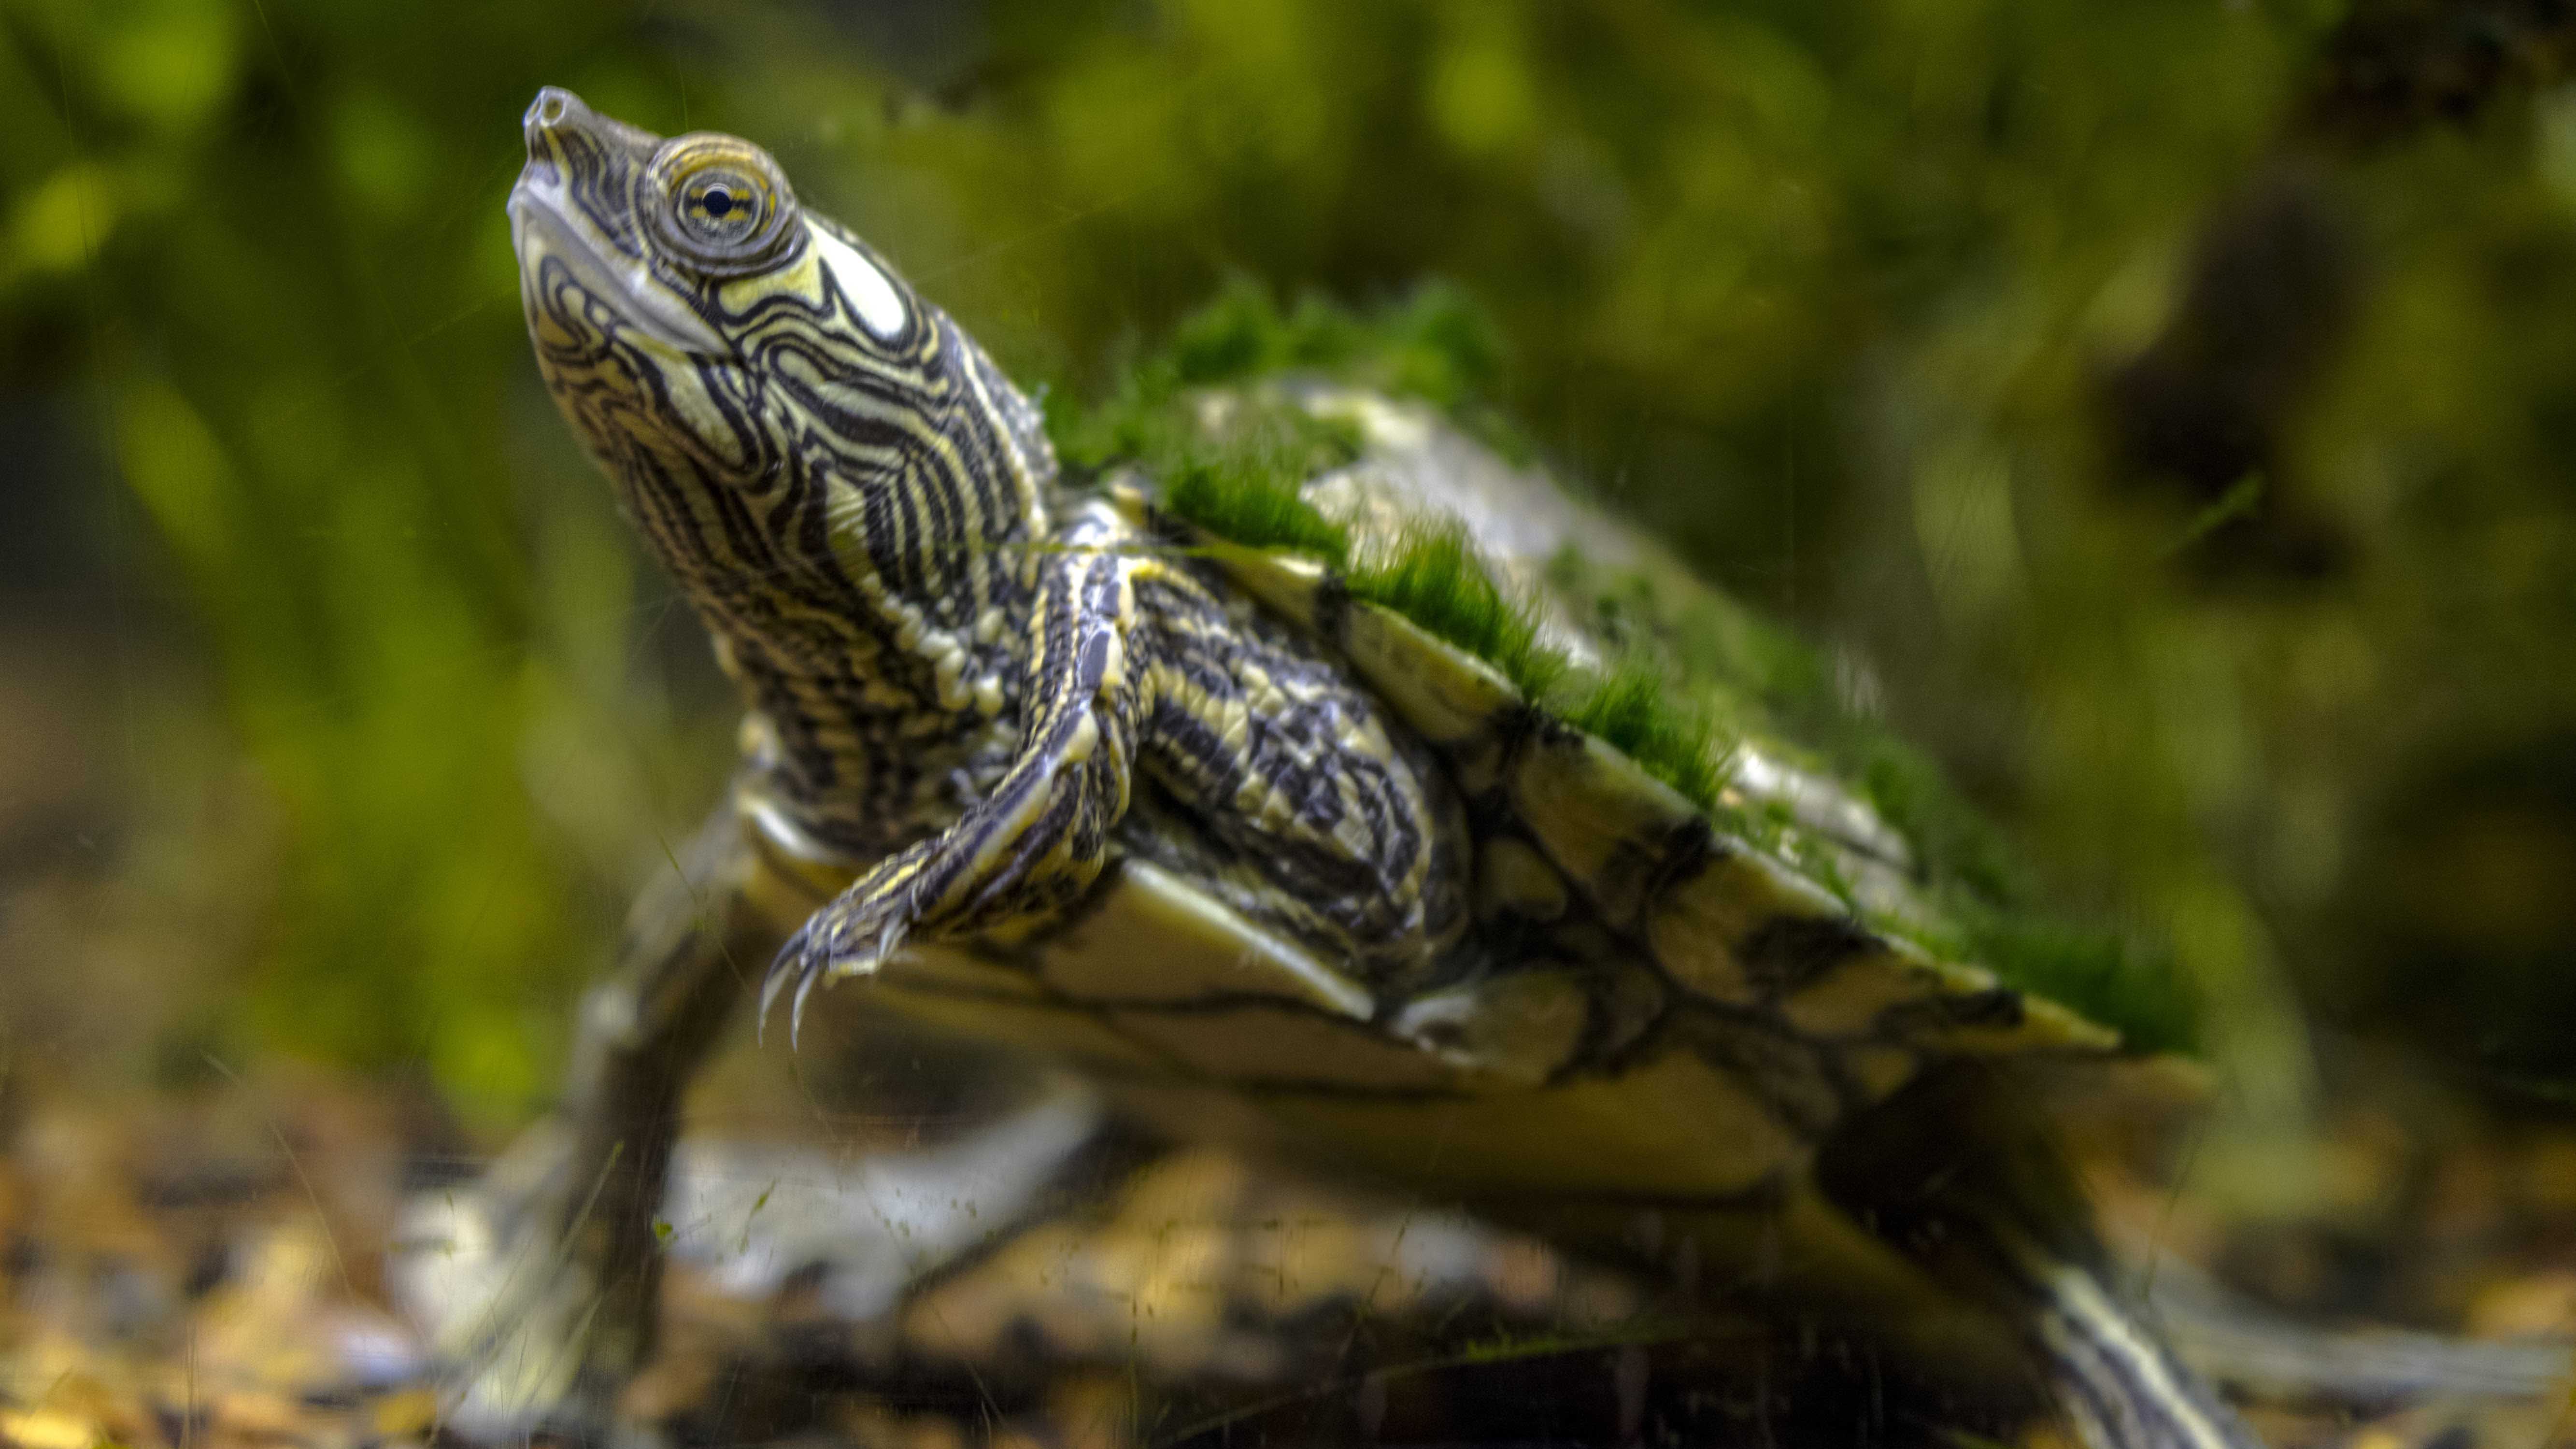 A Pearl River Map Turtle at the Tennessee Aquarium